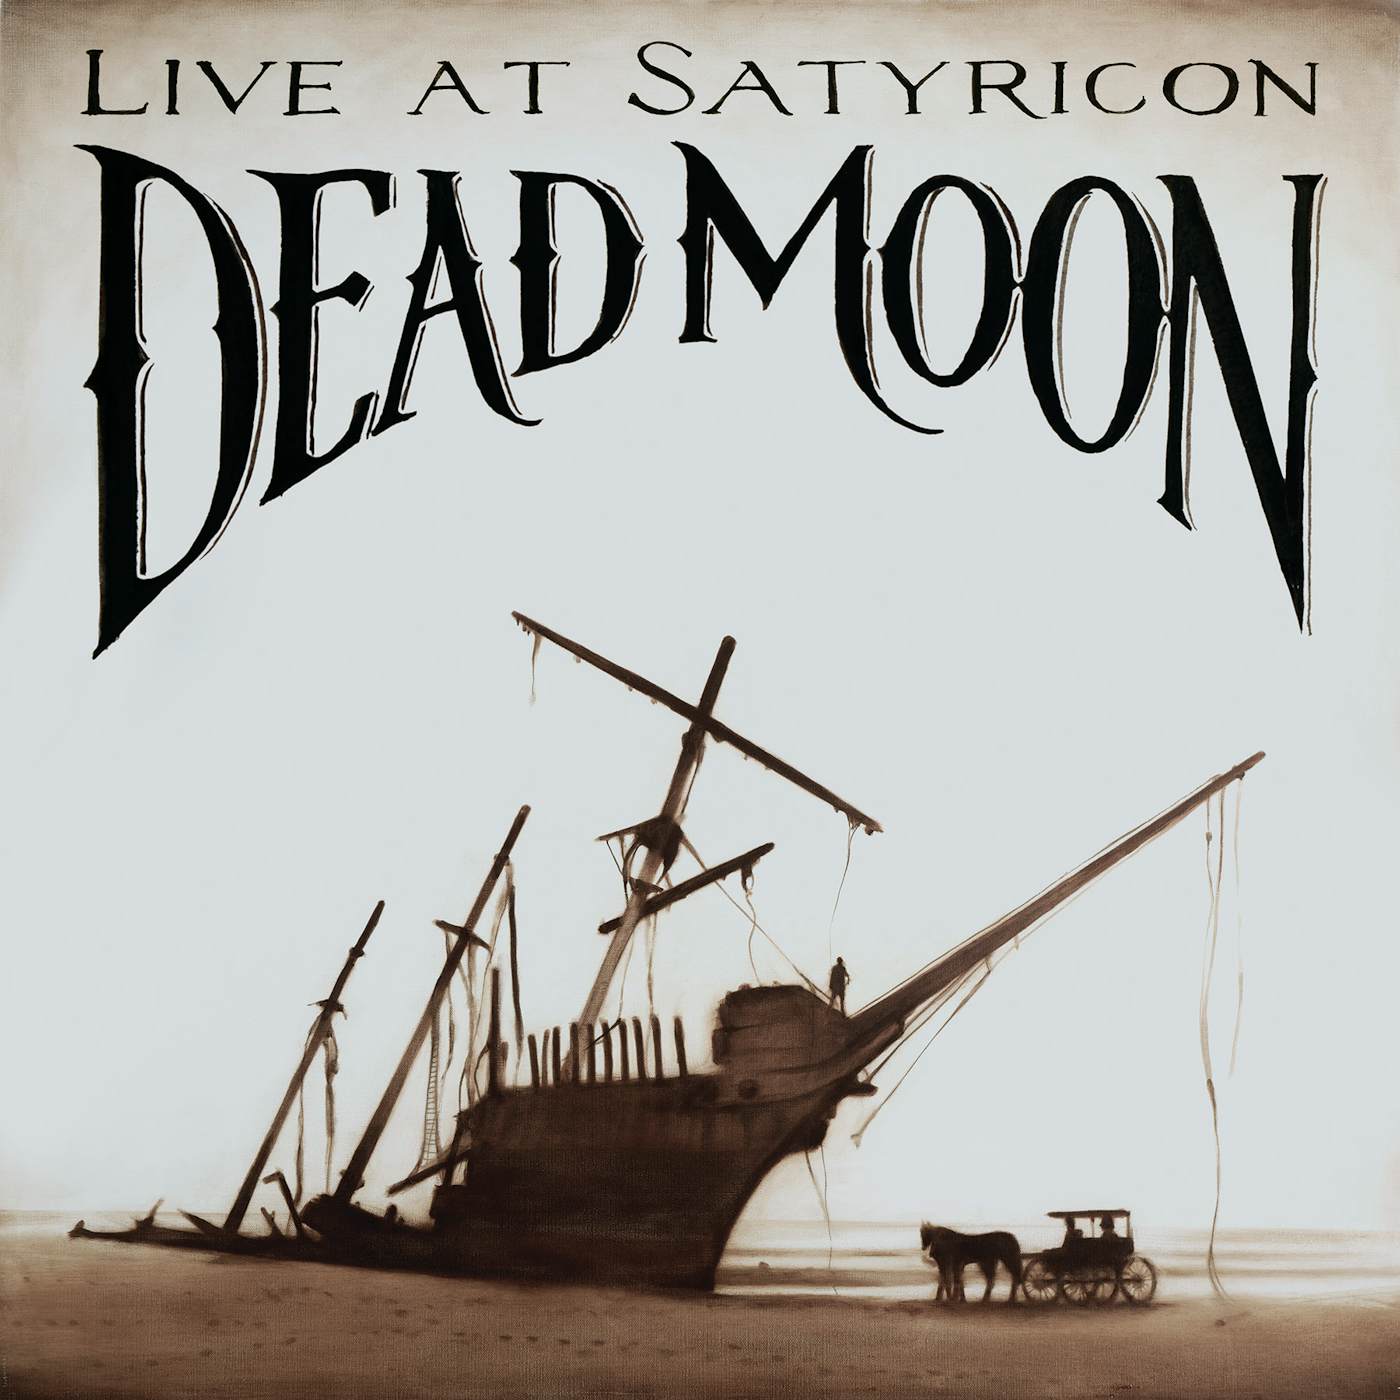 Dead Moon TALES FROM THE GREASE TRAP 1: LIVE AT SATYRICON CD